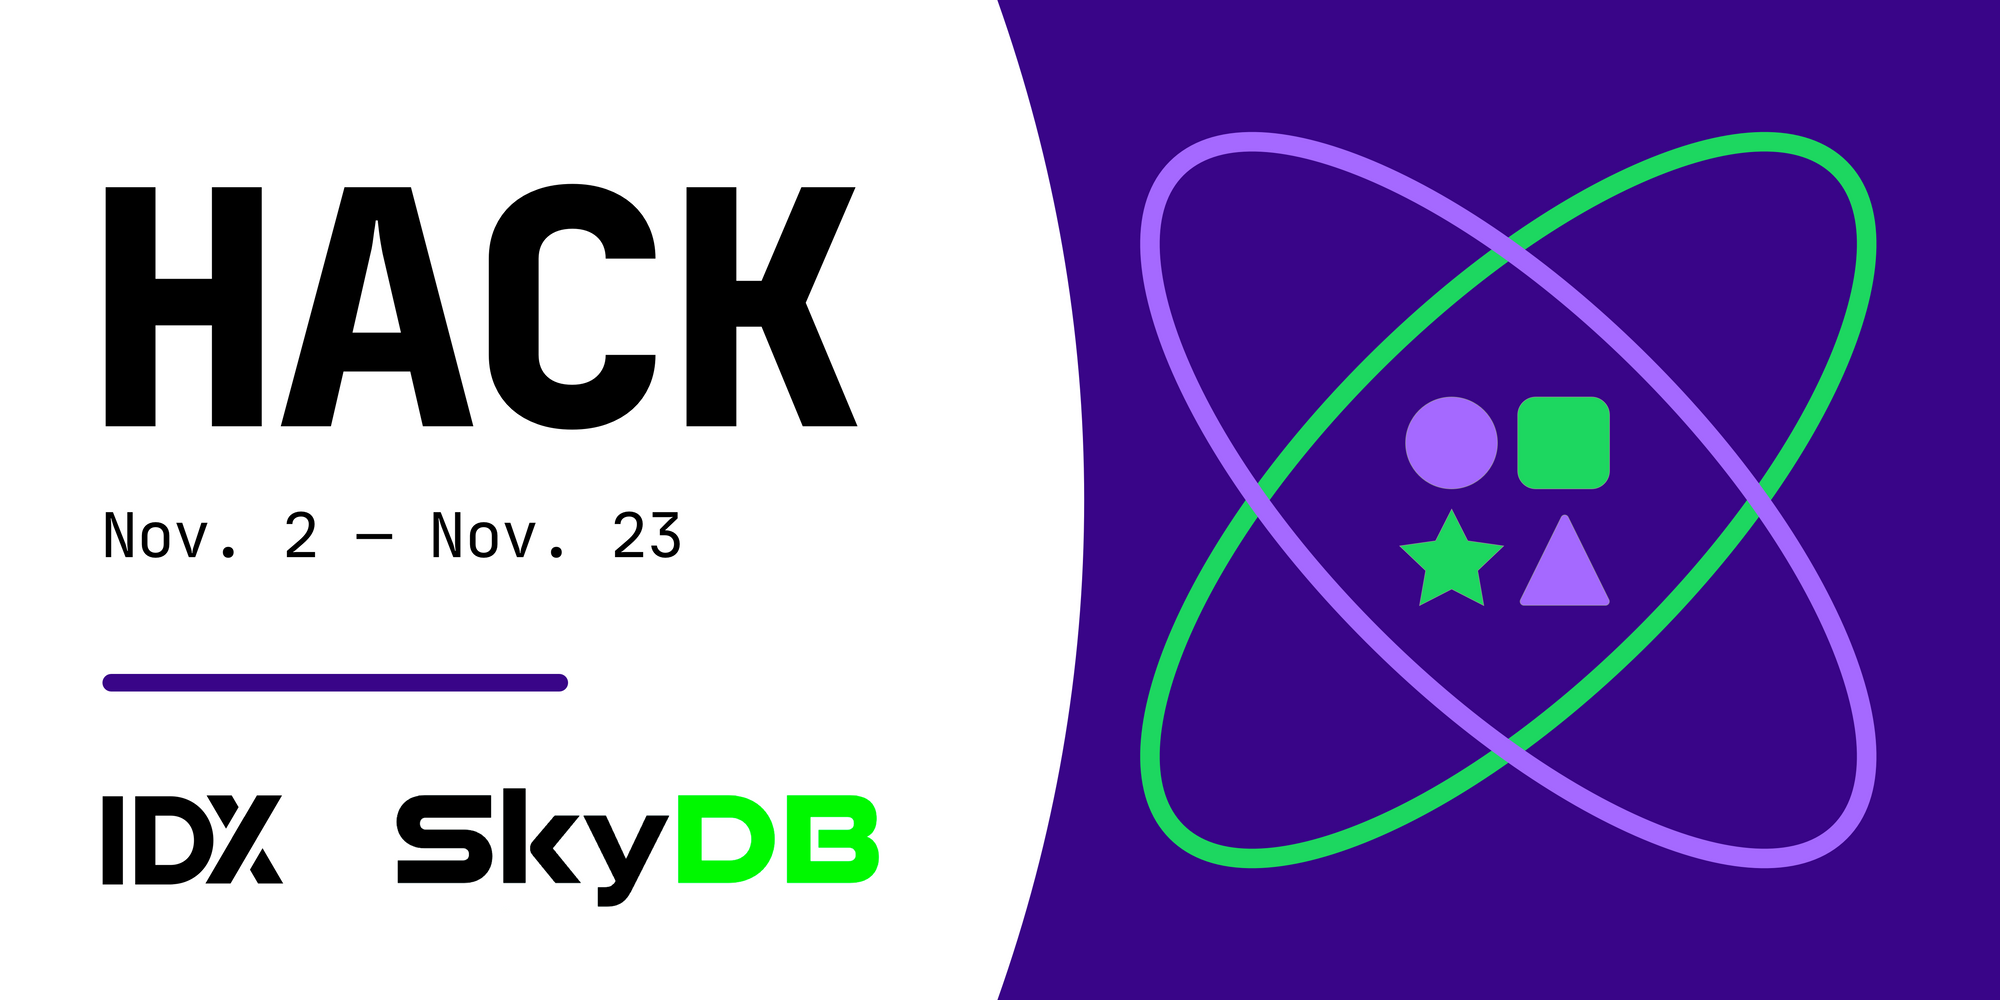 IDX and SkyDB join forces for a future of Web3 hackathon